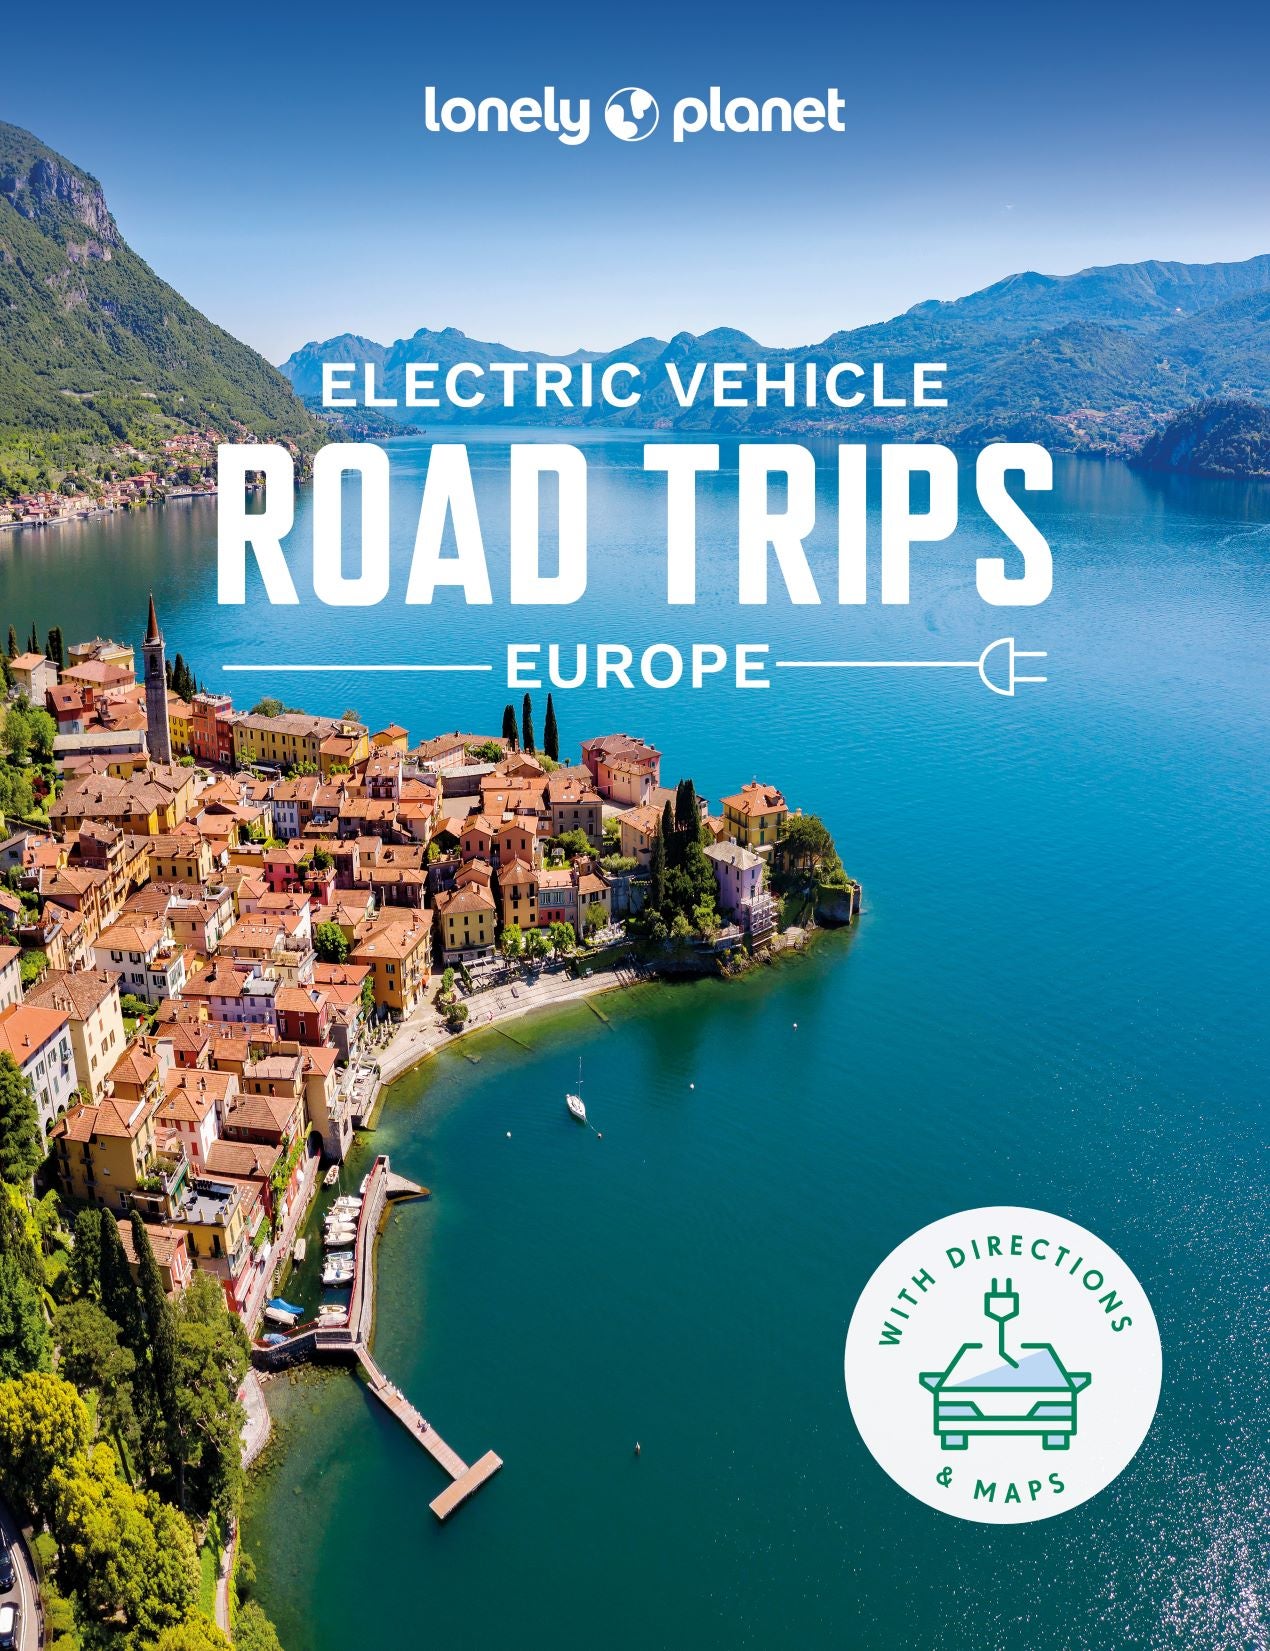 Europe　Vehicle　Paper　Lonely　Planet　Electric　Planet　Lonely　by　Road　Trips　Plus